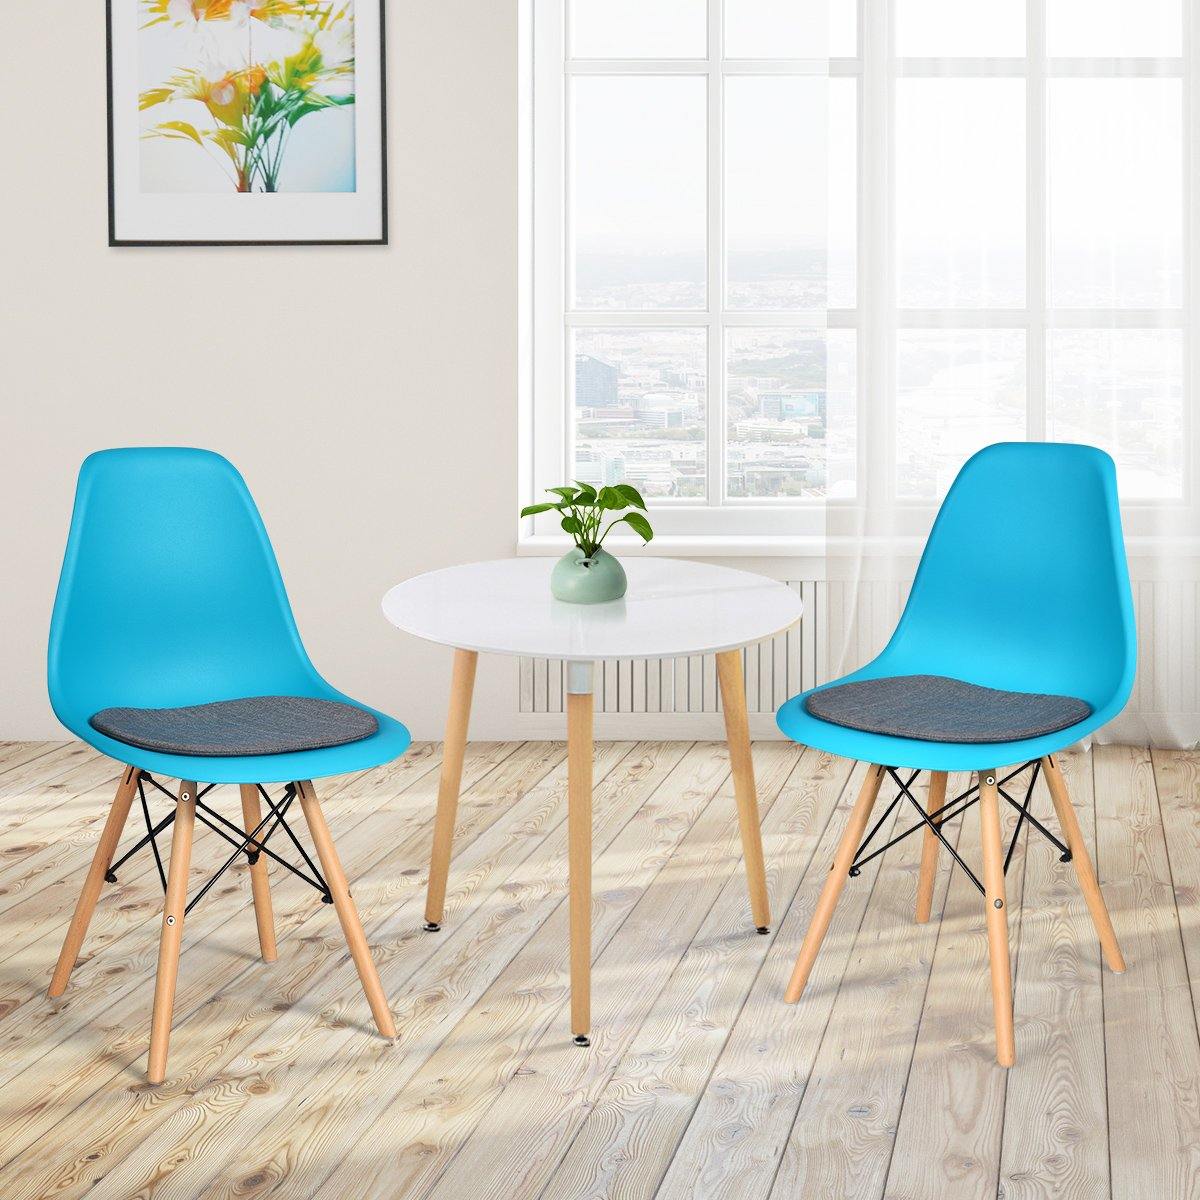 Giantex Dining DSW Chairs with Linen Cushion, Modern Mid Century Shell Chairs w/ Wood Legs (2, Blue) - Giantexus